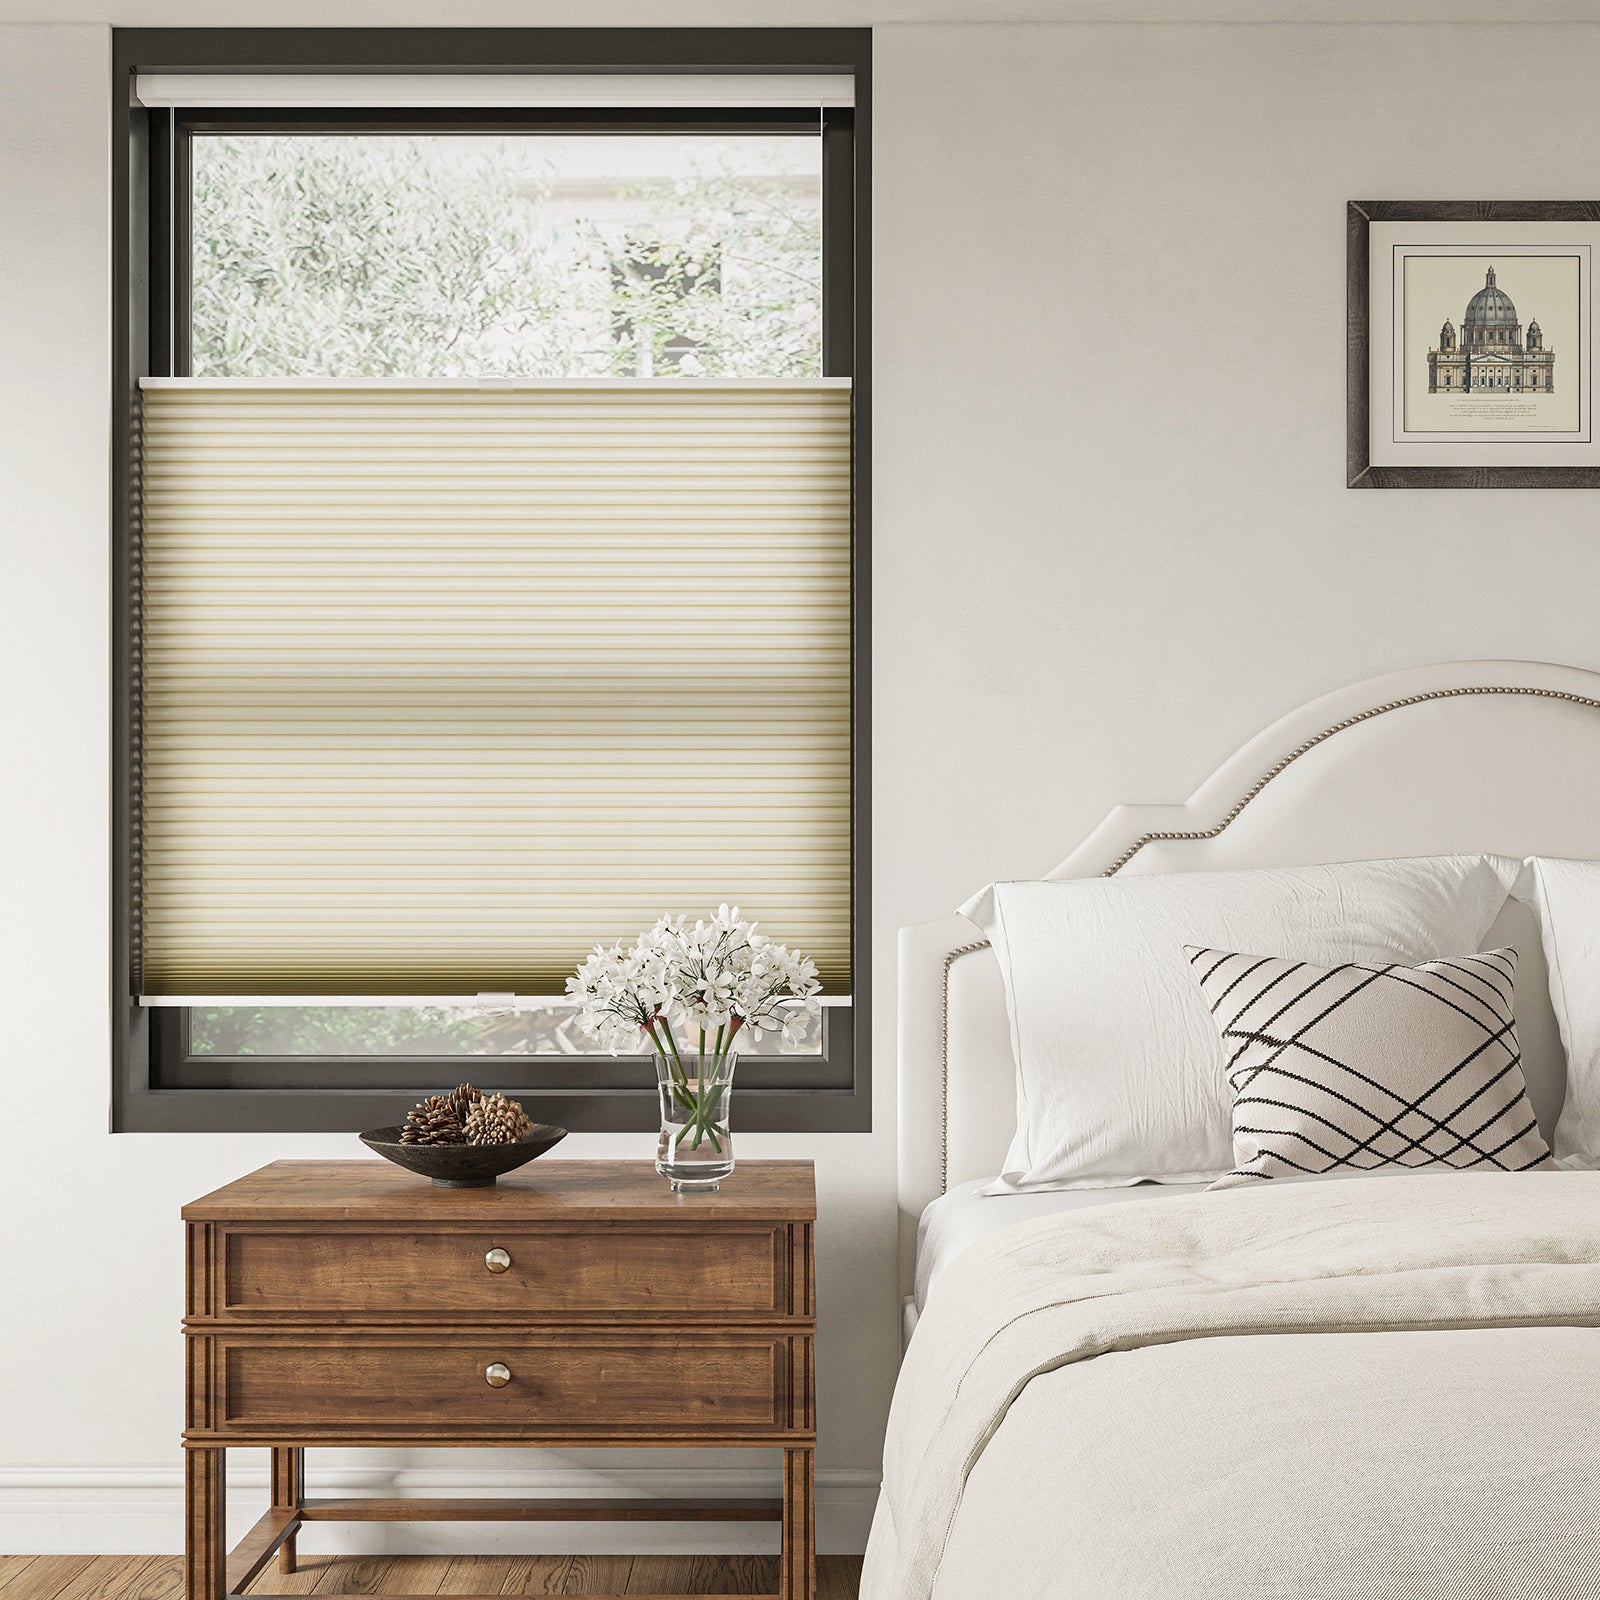 The Benefits of Motorized Blinds